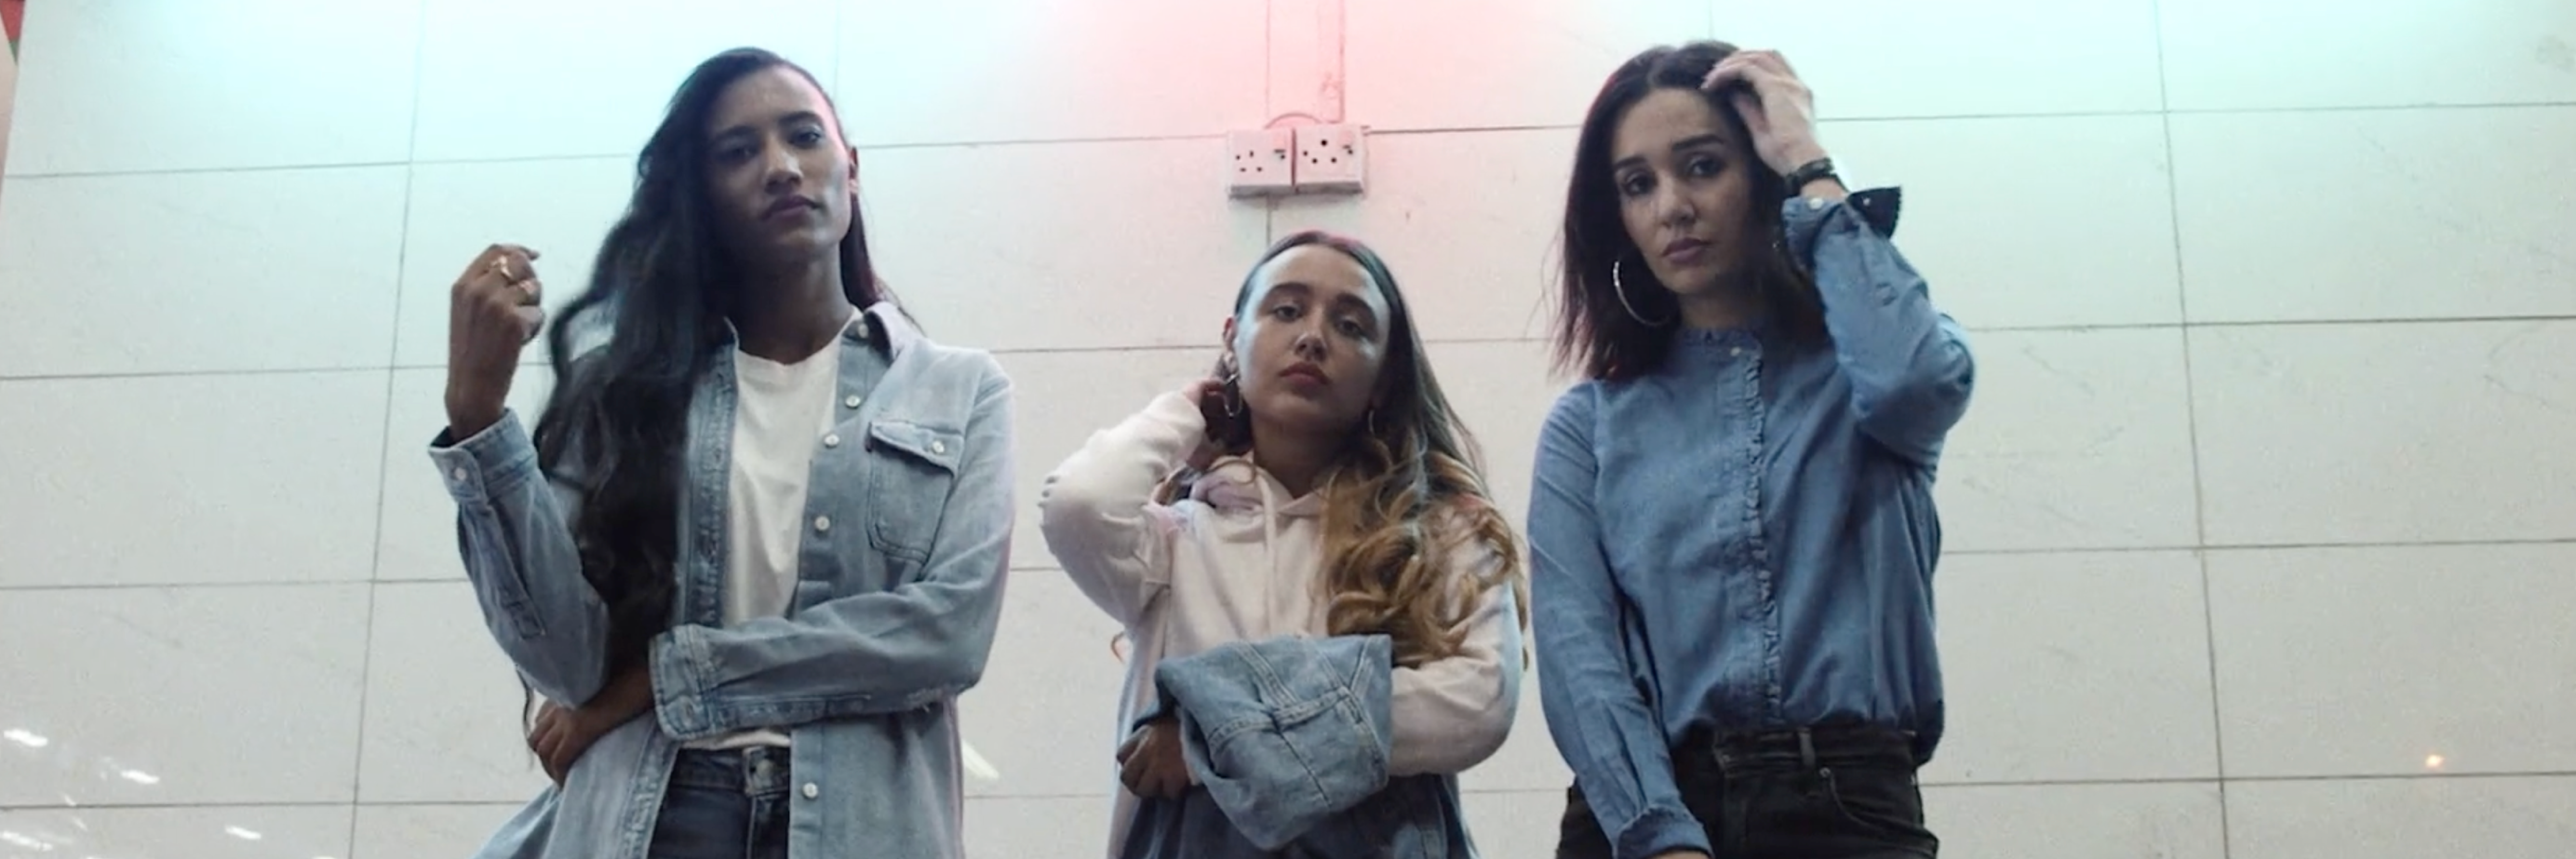 Photo of three women standing against a white tiled wall, playing with their hair. They are all wearing Levi denim shirts or jackets. 